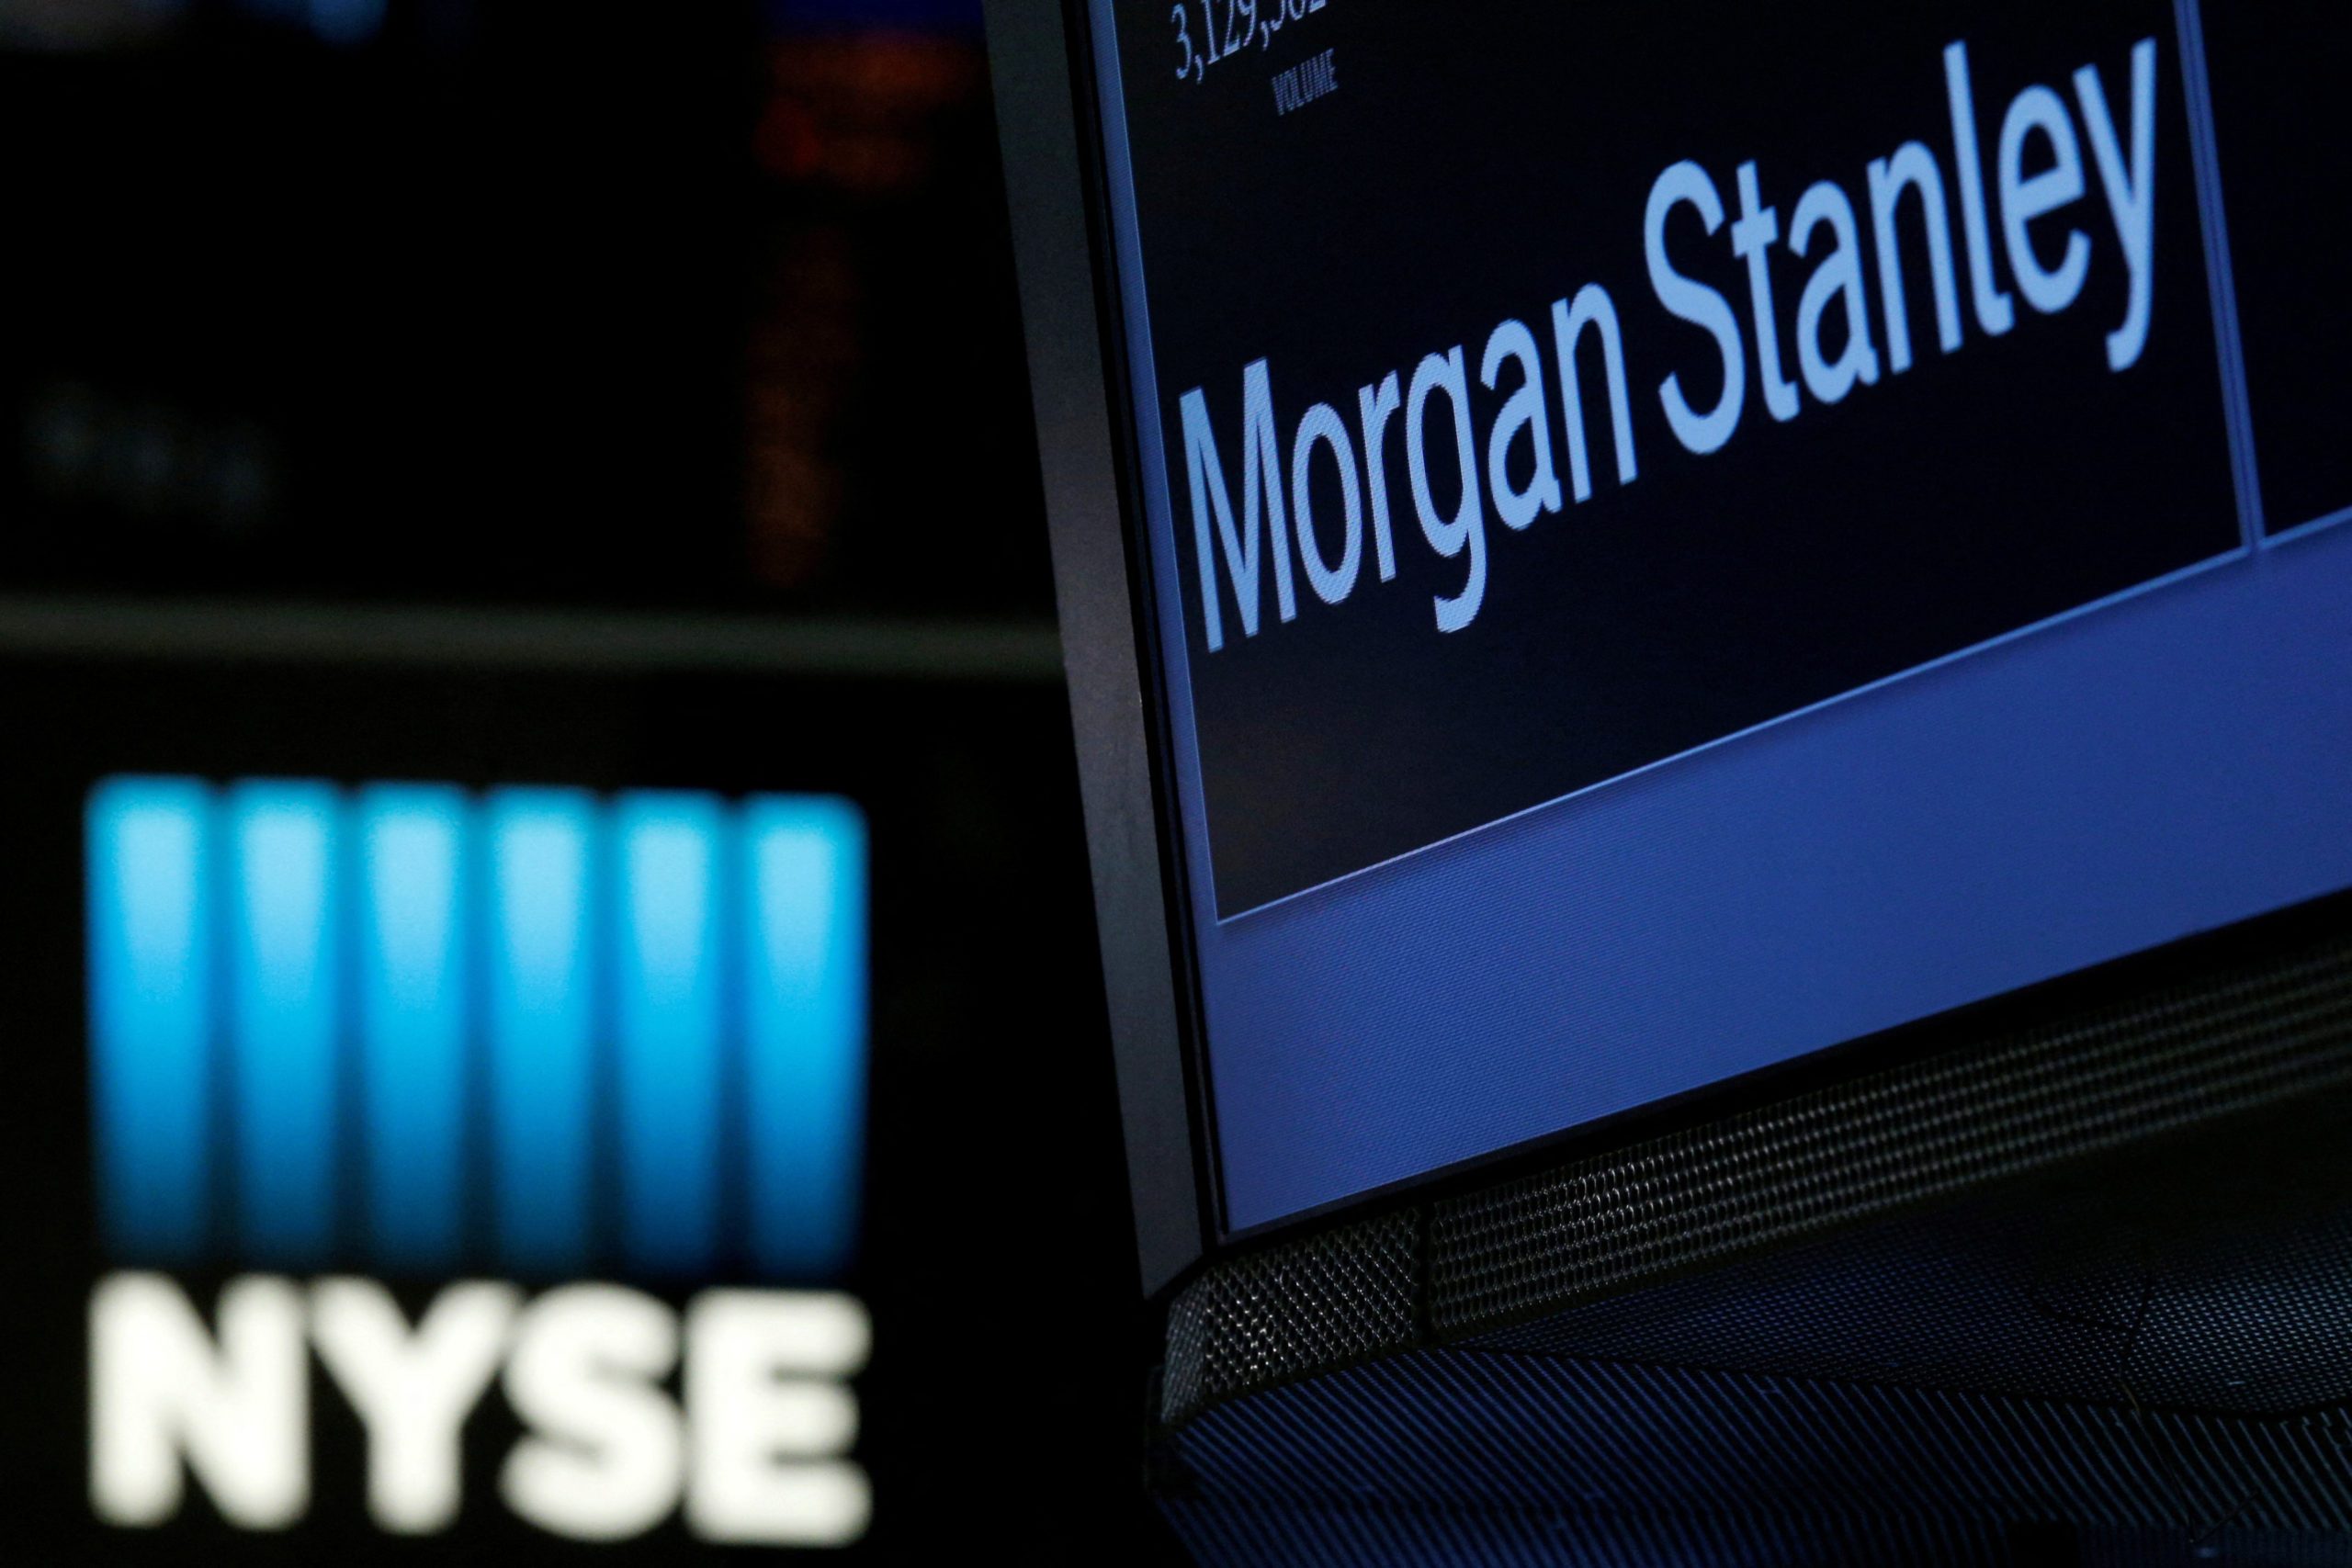 Morgan Stanley weighs cutting 7% of Asia investment bank jobs